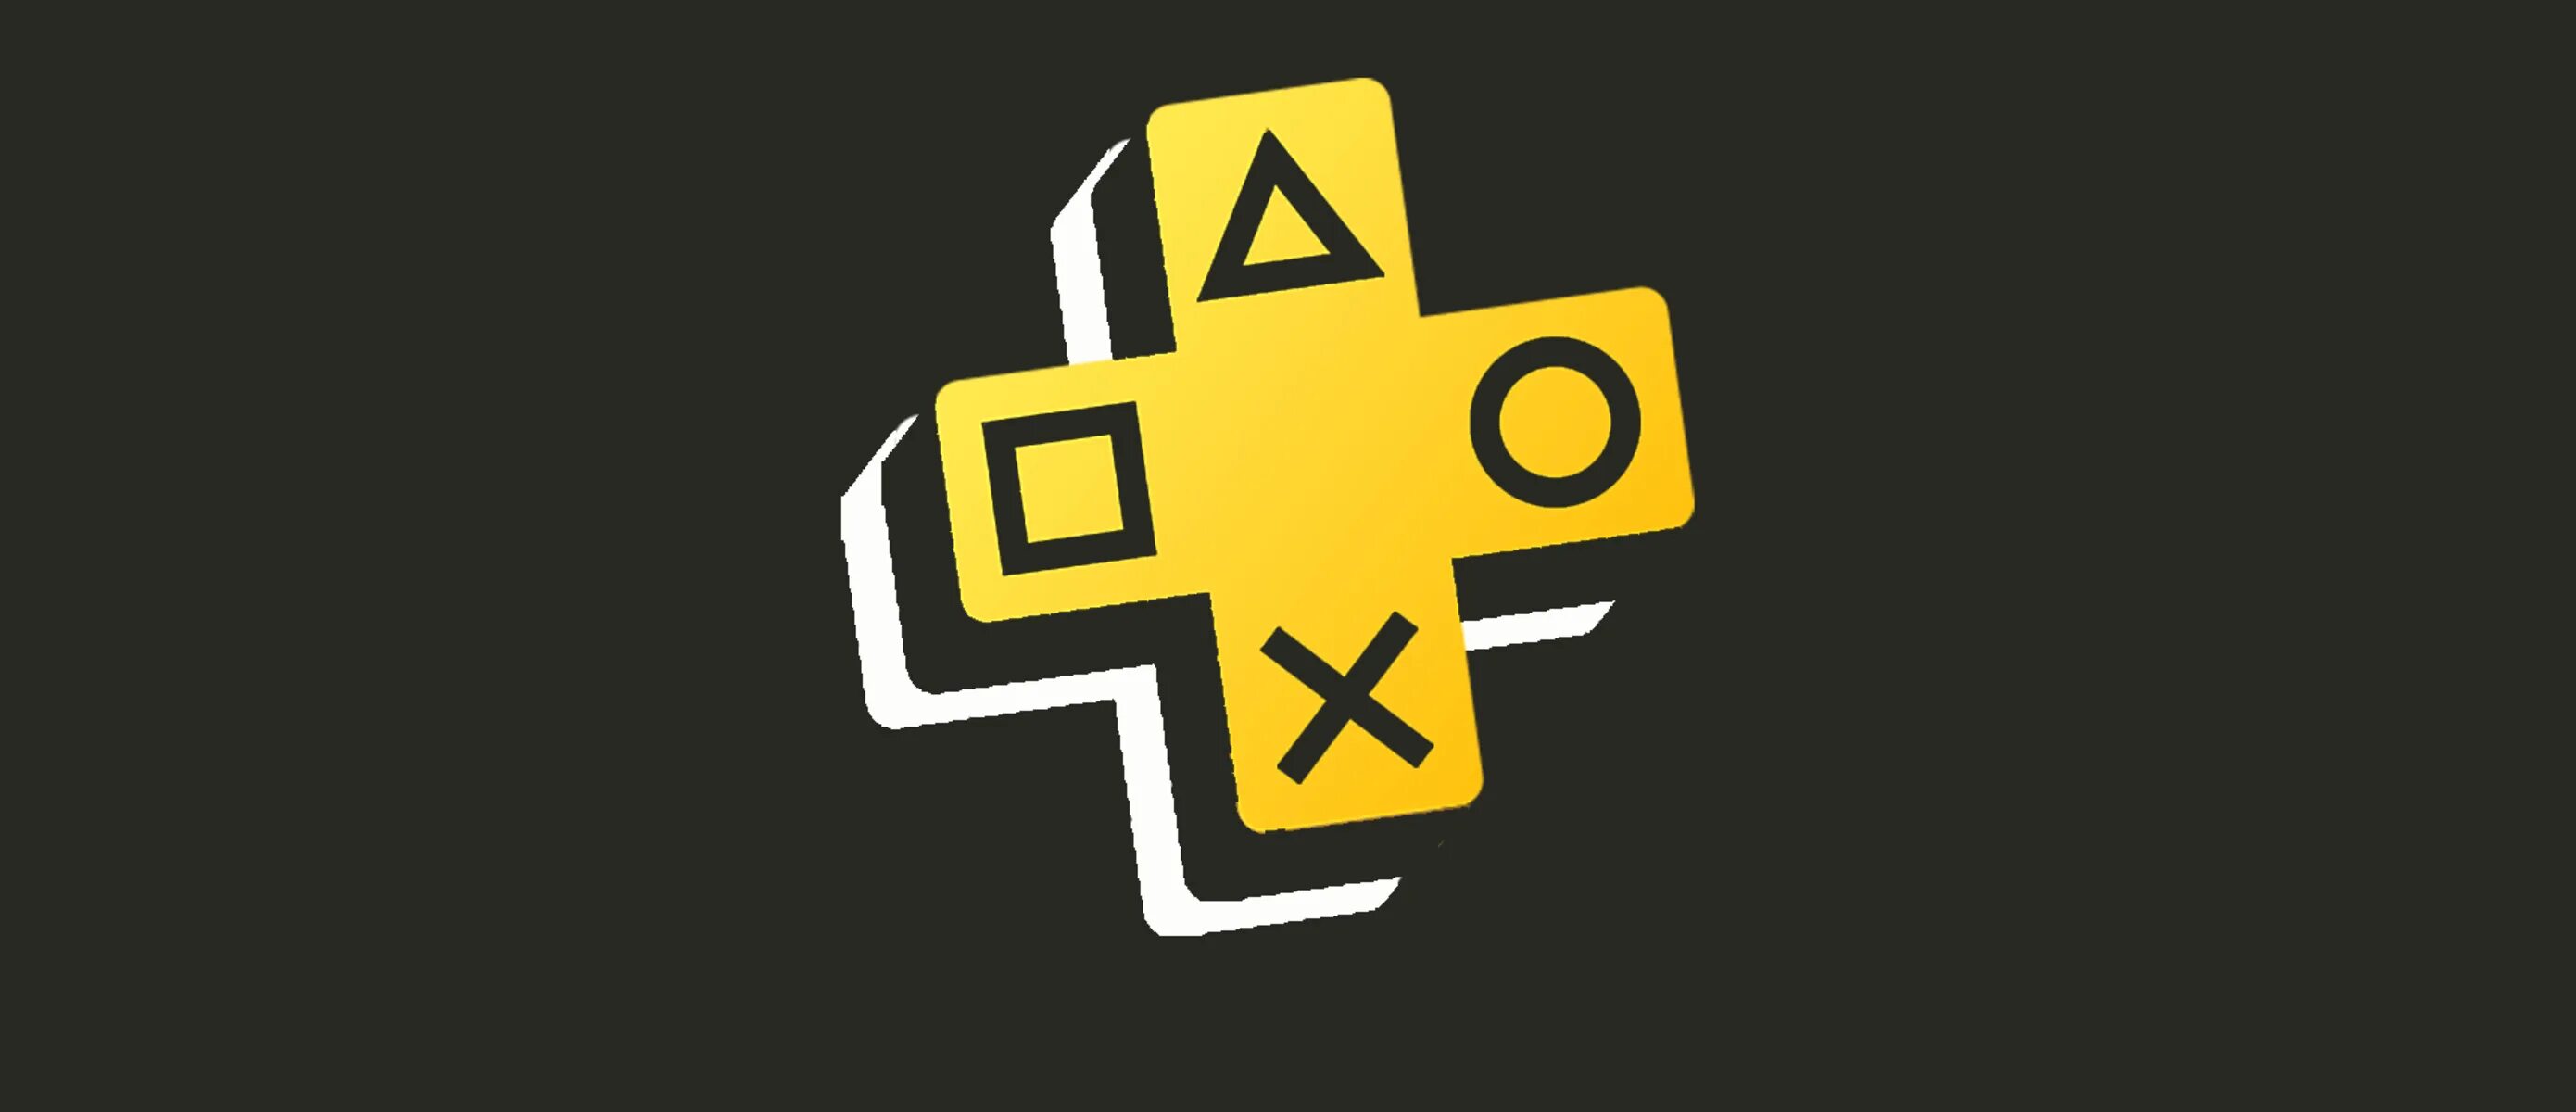 Sony PLAYSTATION Plus. PS Plus Deluxe. PS Plus logo. PLAYSTATION PS Plus Deluxe. Подписка ps4 deluxe